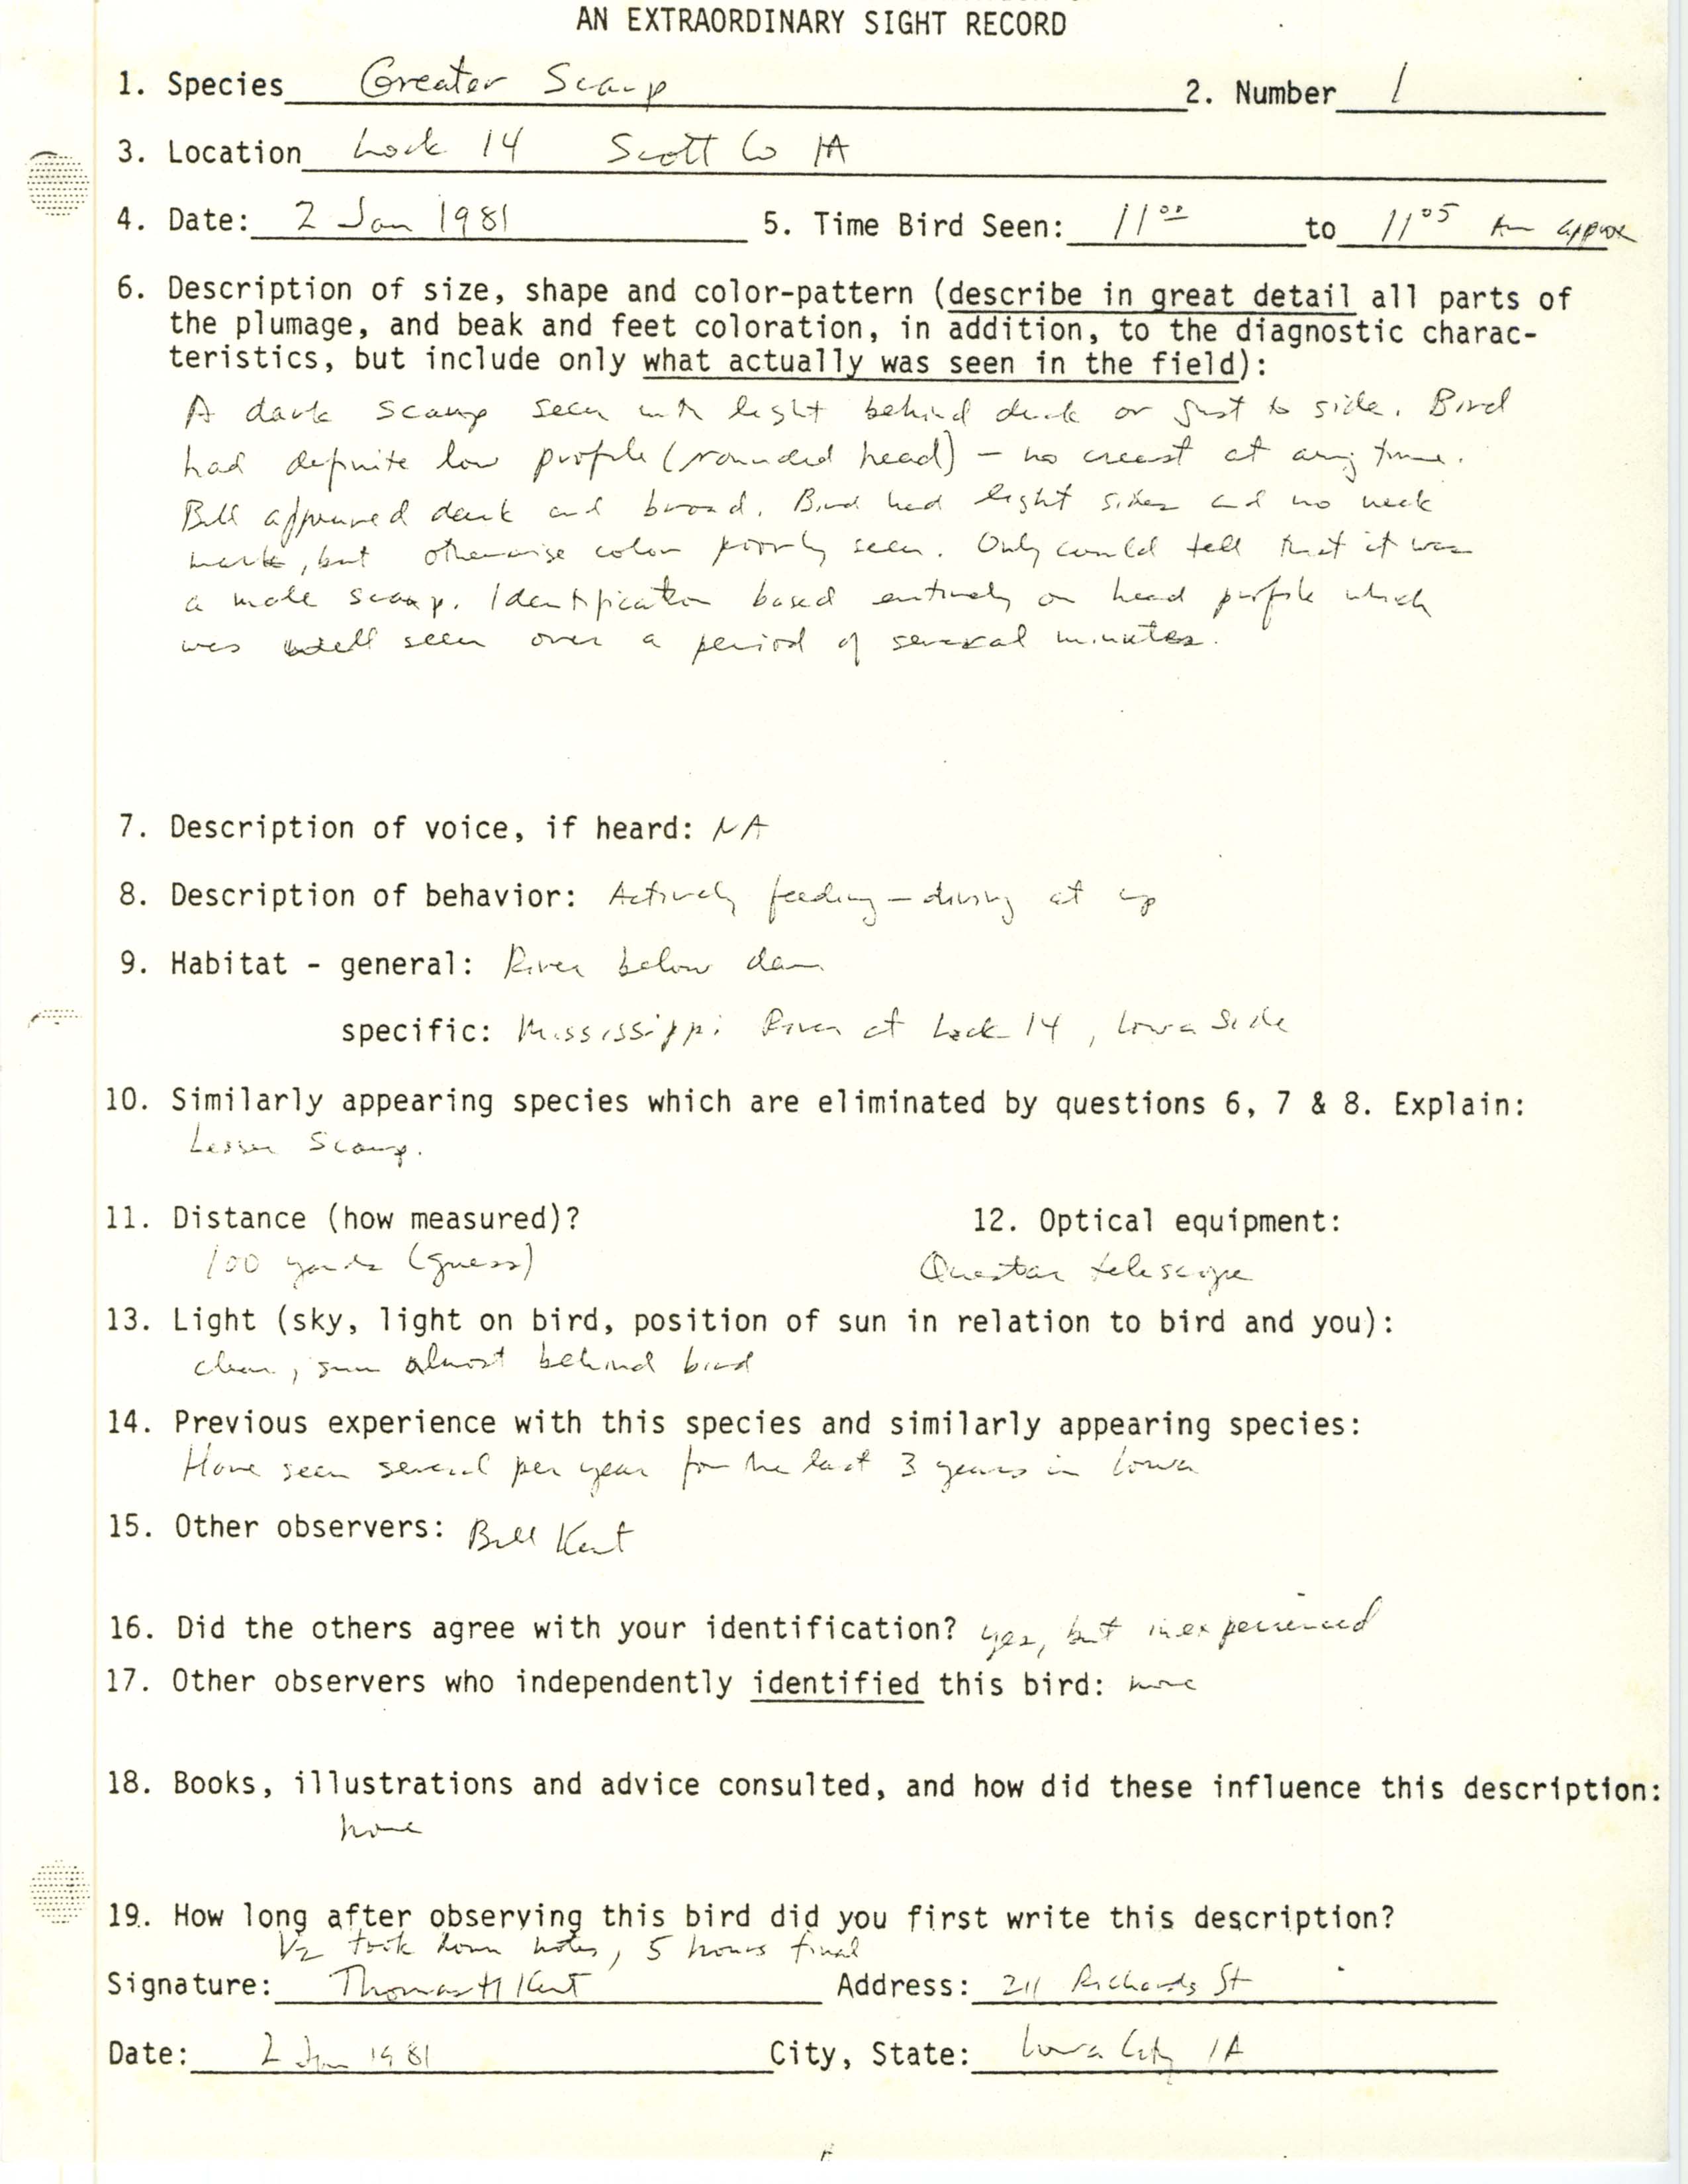 Rare bird documentation form for Greater Scaup at Lock 14, 1981